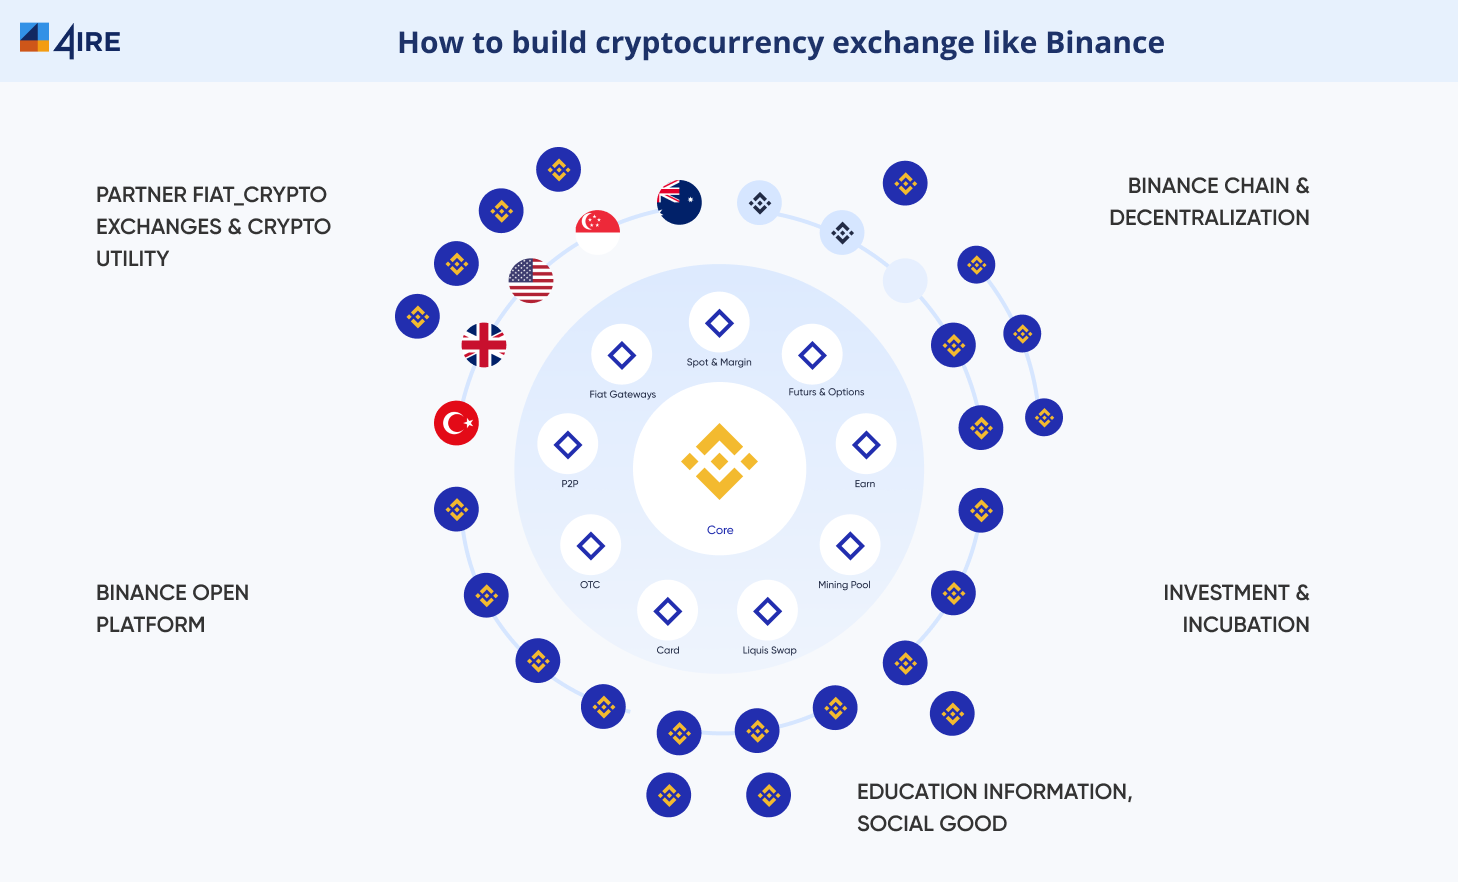 How to build a cryptocurrency exchange like Binance in 